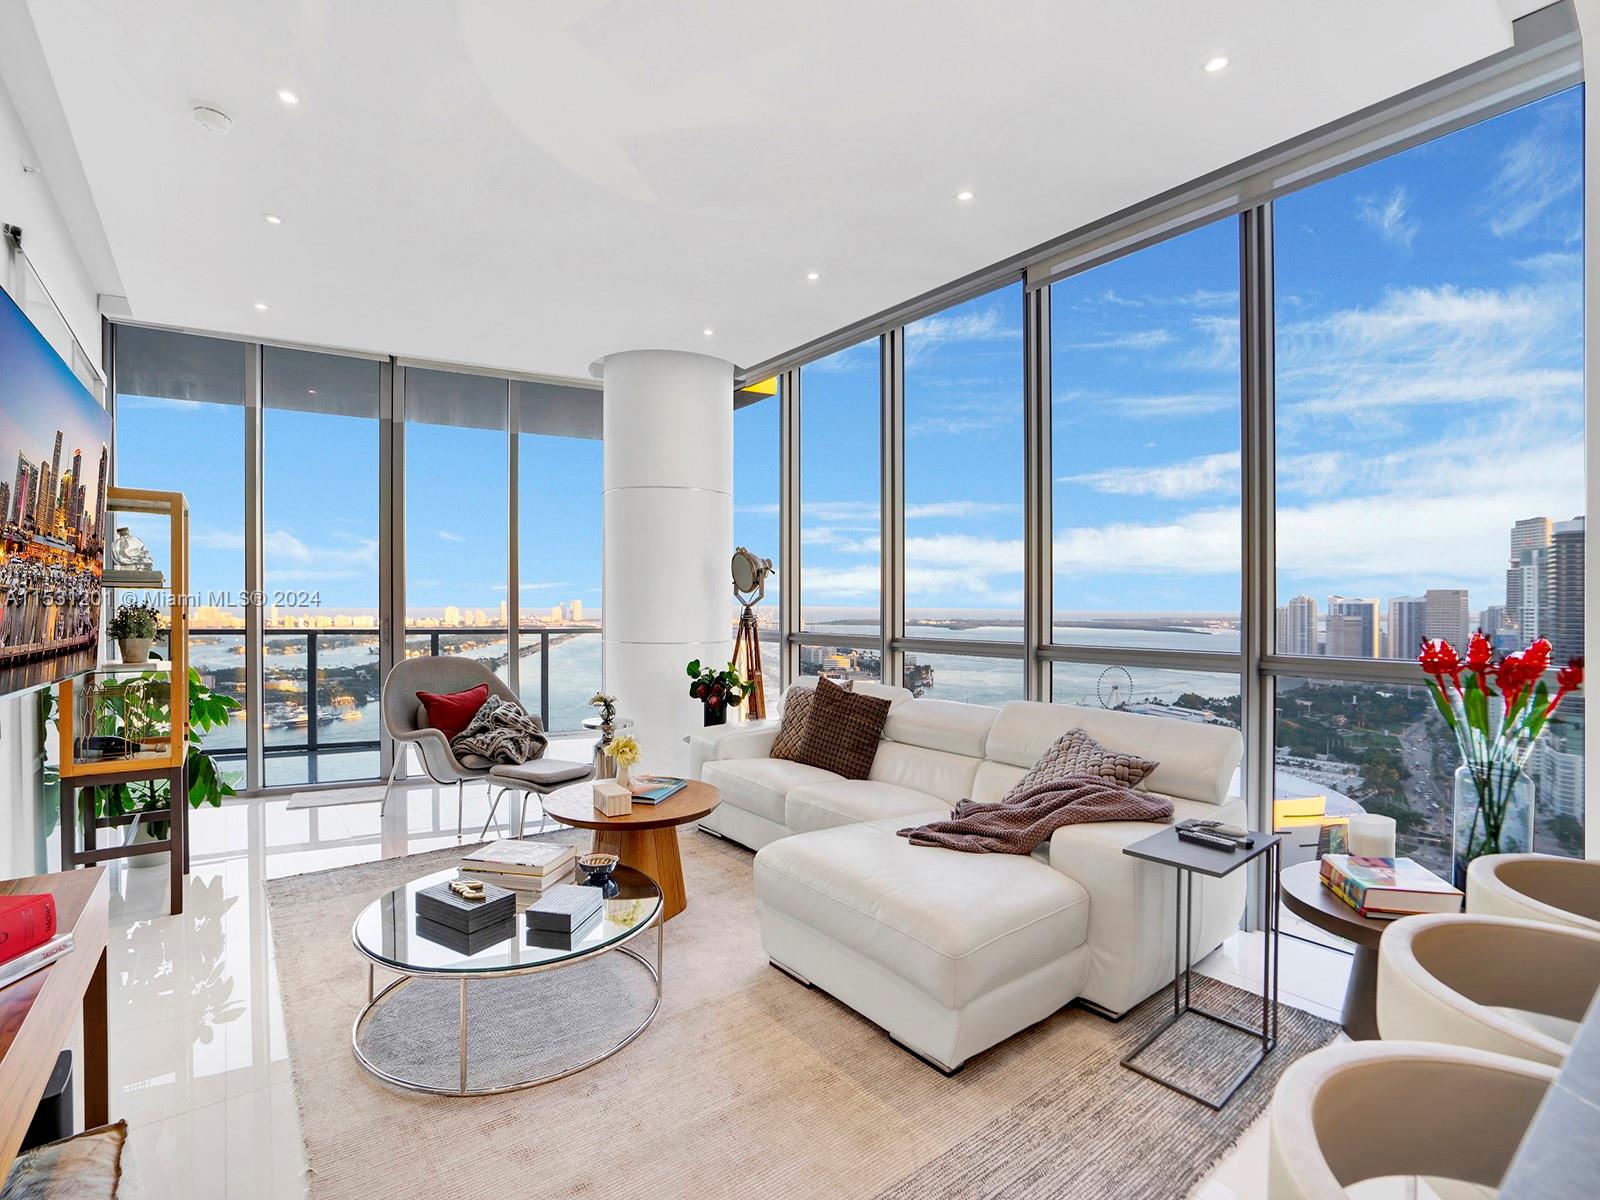 This 2106 sq/ft 3BD/2.5BA is one of the most sought-after lines at Marquis Miami Residences. Enjoy stunning views of Biscayne Bay, Miami Beach & The Atlantic Ocean from the 40th floor of this beautifully furnished unit. The unit offers private elevator entry, neutral white floors. Marquis Residences is located in the heart of Miami just steps from Museum Park, PAMM, Adrienne Arsht Performing Arts, South Beach, Midtown, & Brickell. Enjoy sunrise lap pool or bask in the afternoon pool. Grab a workout in the newly updated gym or just relax and enjoy the poolside restaurant and bar.